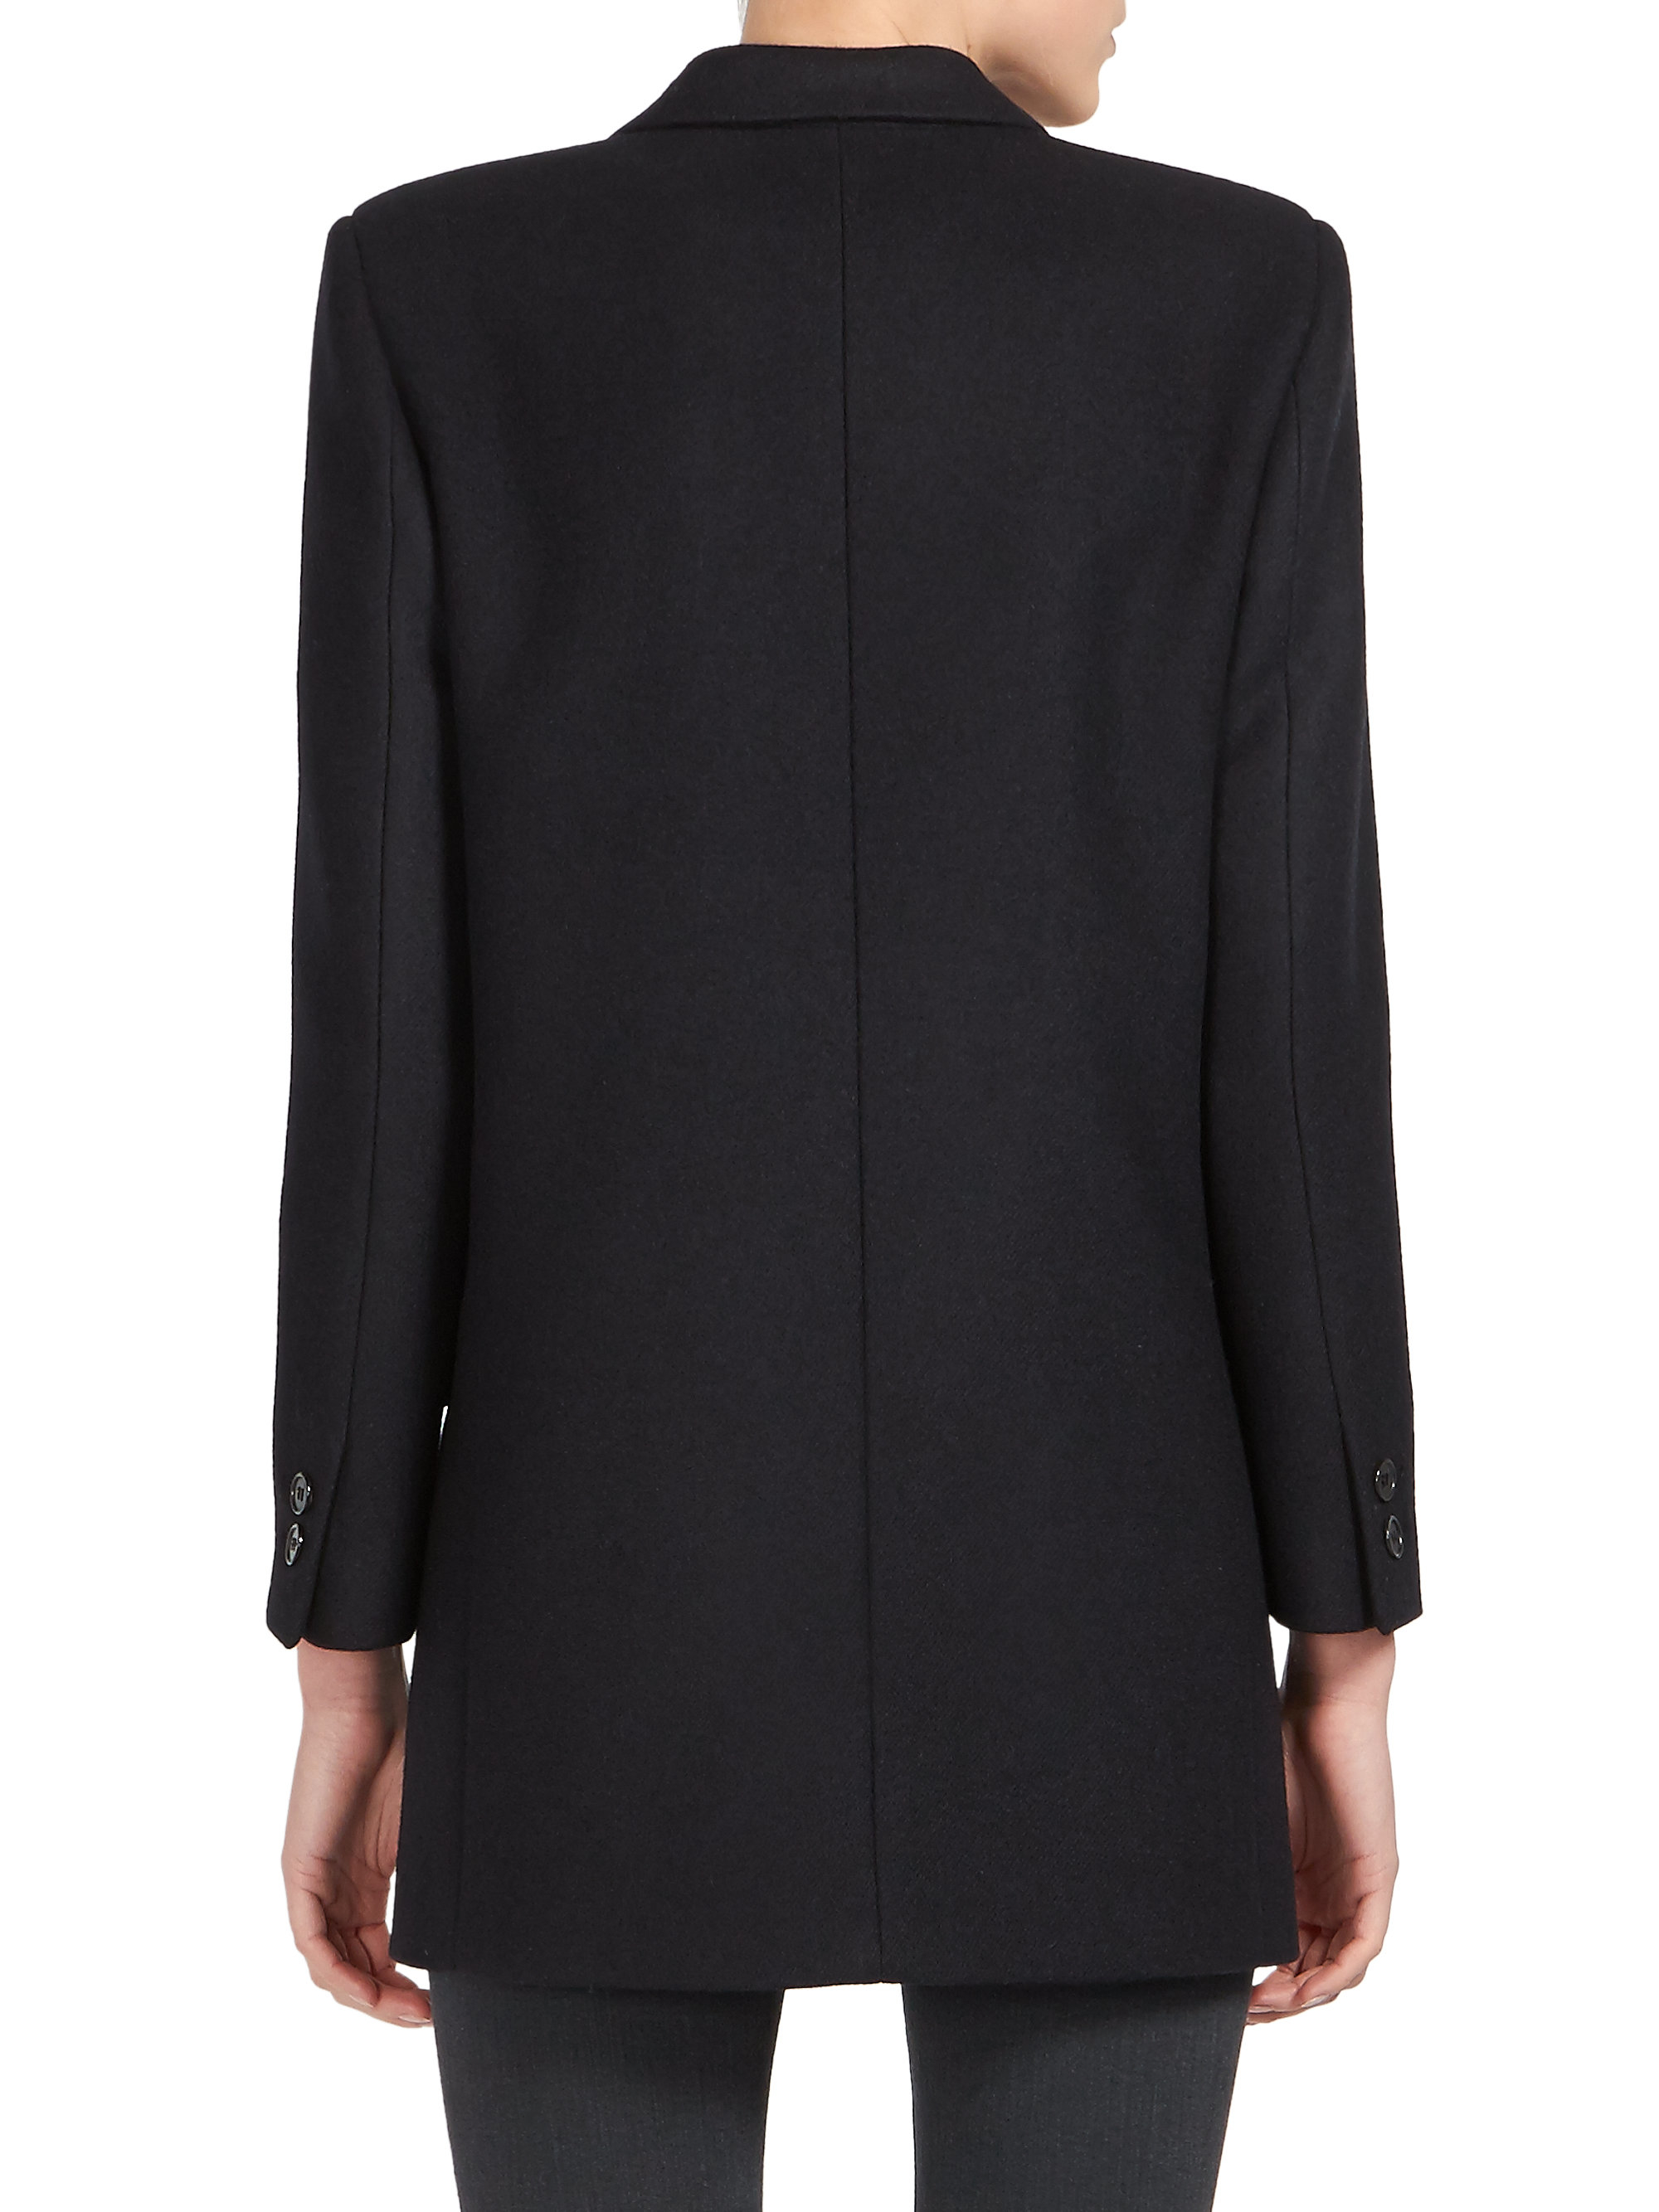 Lyst - Saint Laurent Double-breasted Wool Caban Jacket in Blue